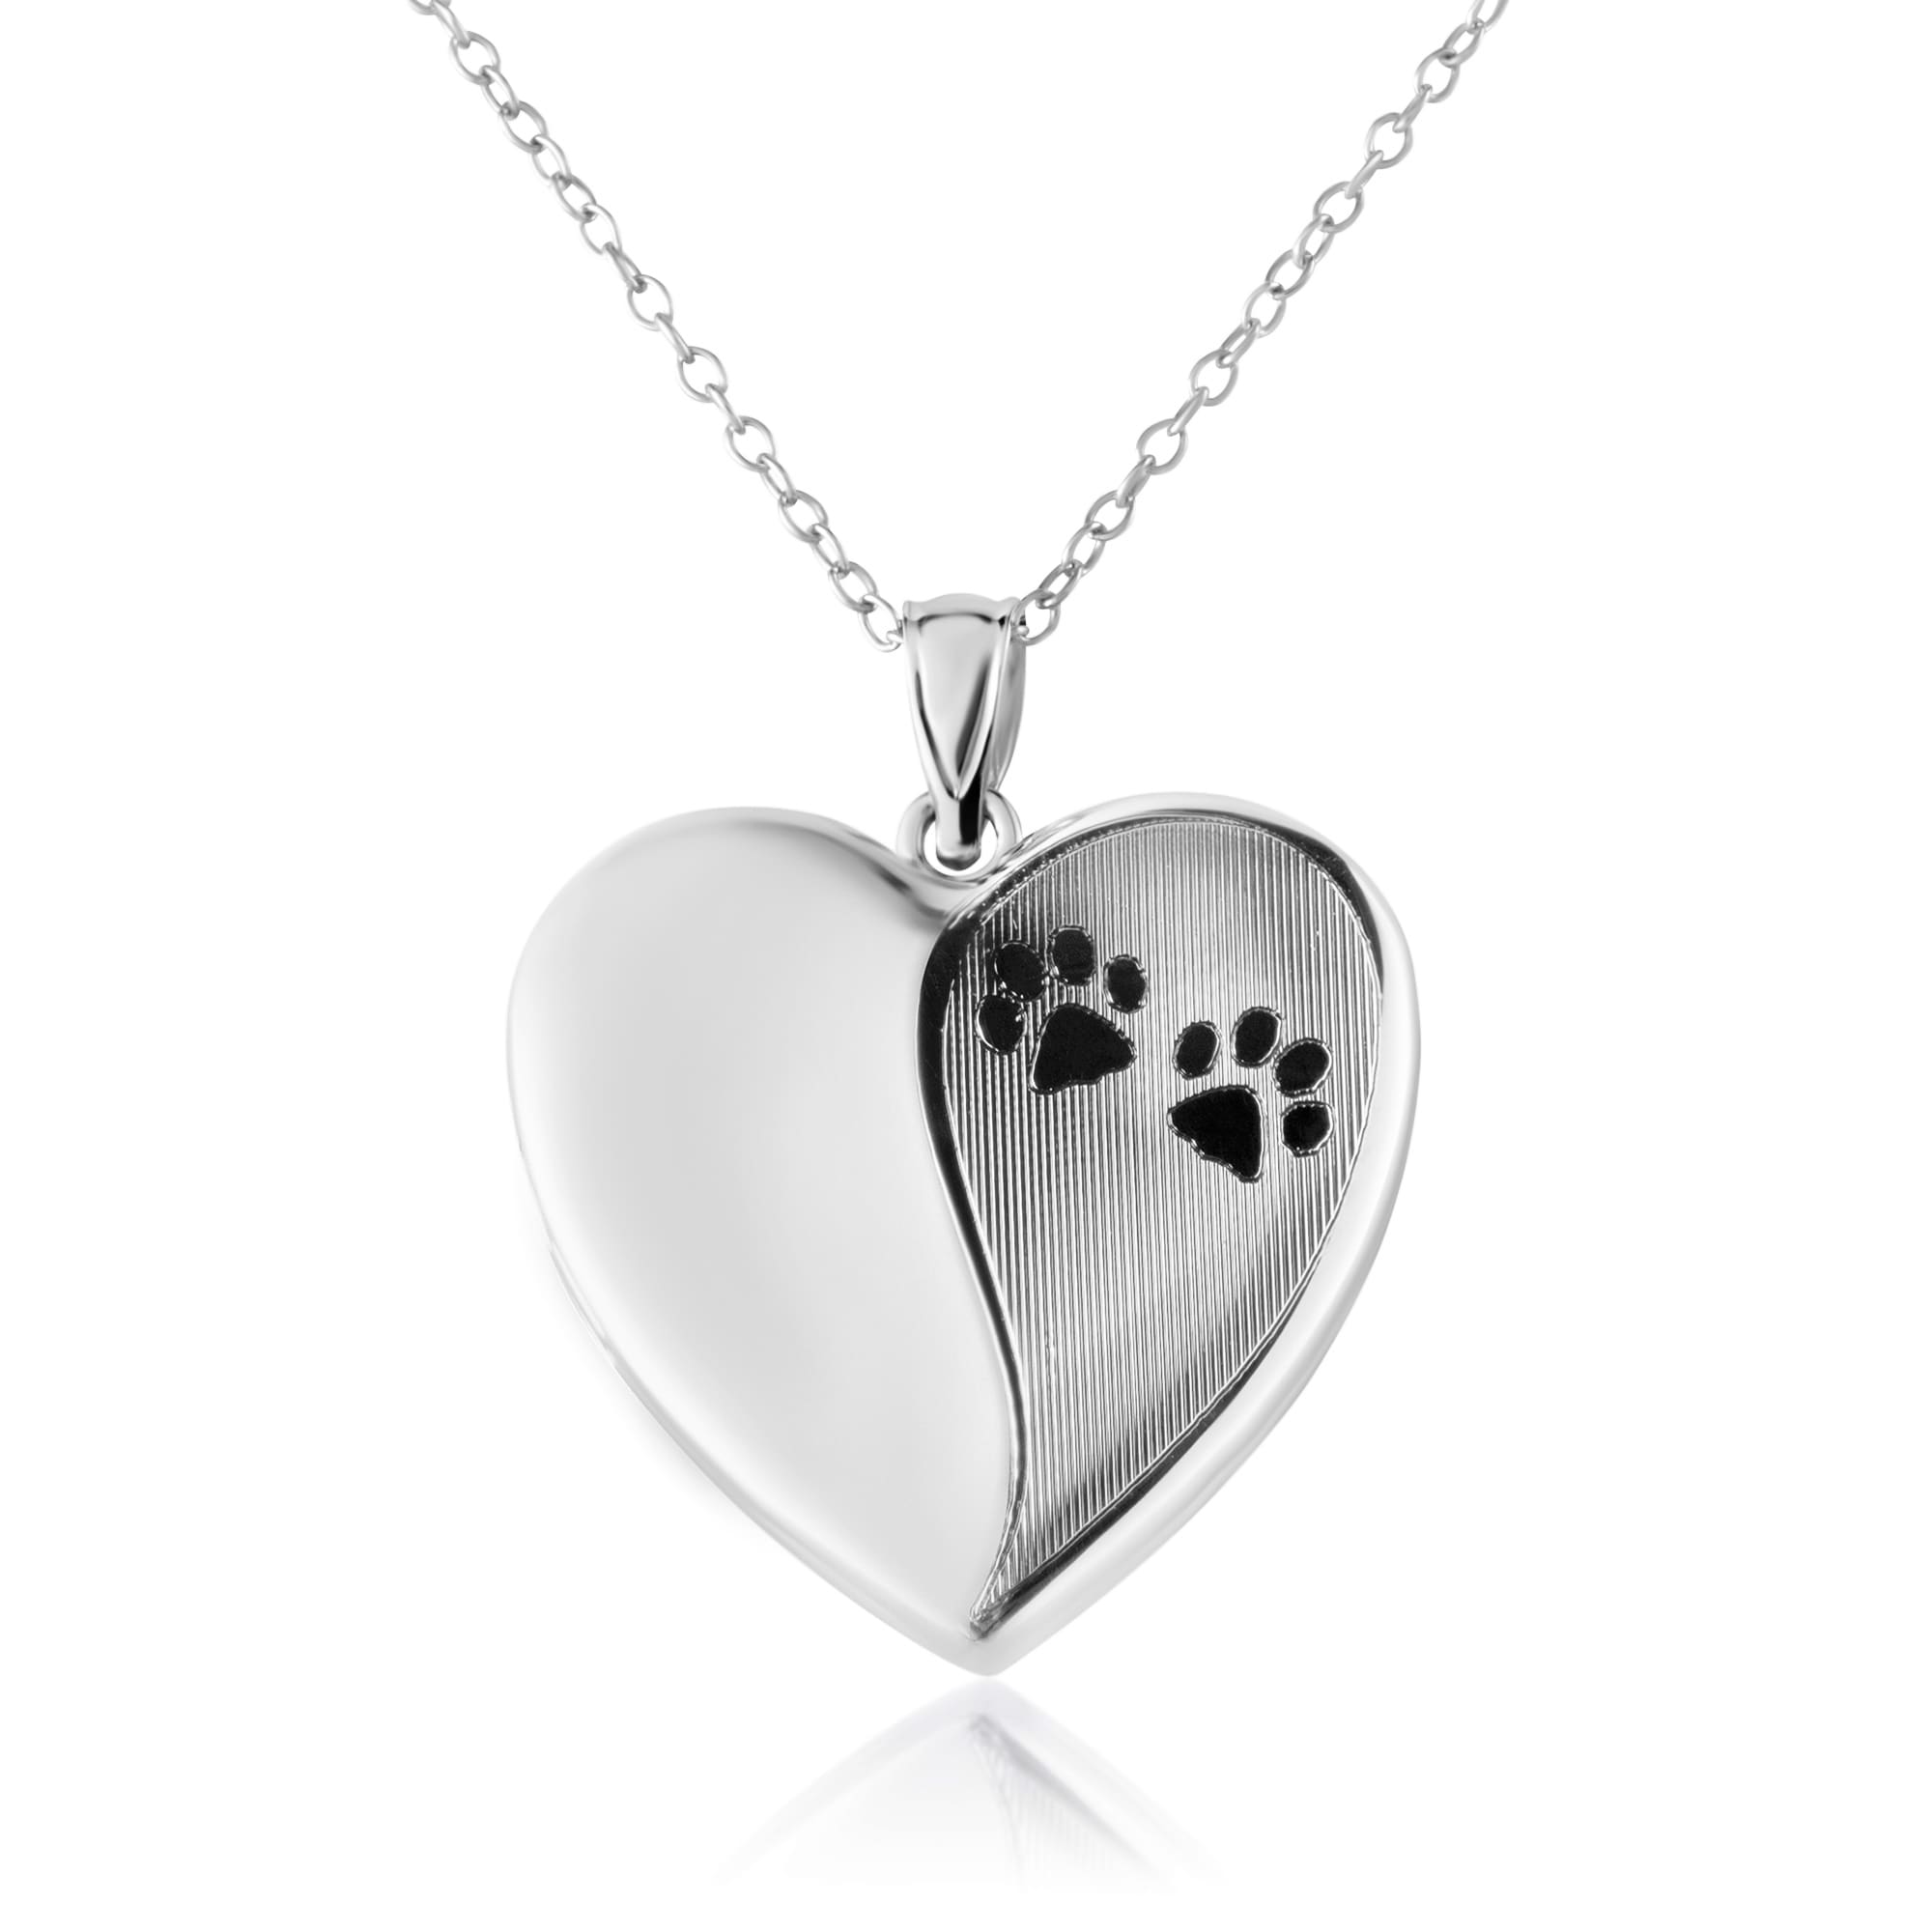 Fashion Pet Lover Dog Cat Paw Print Pendant Love Heart Necklace Chain